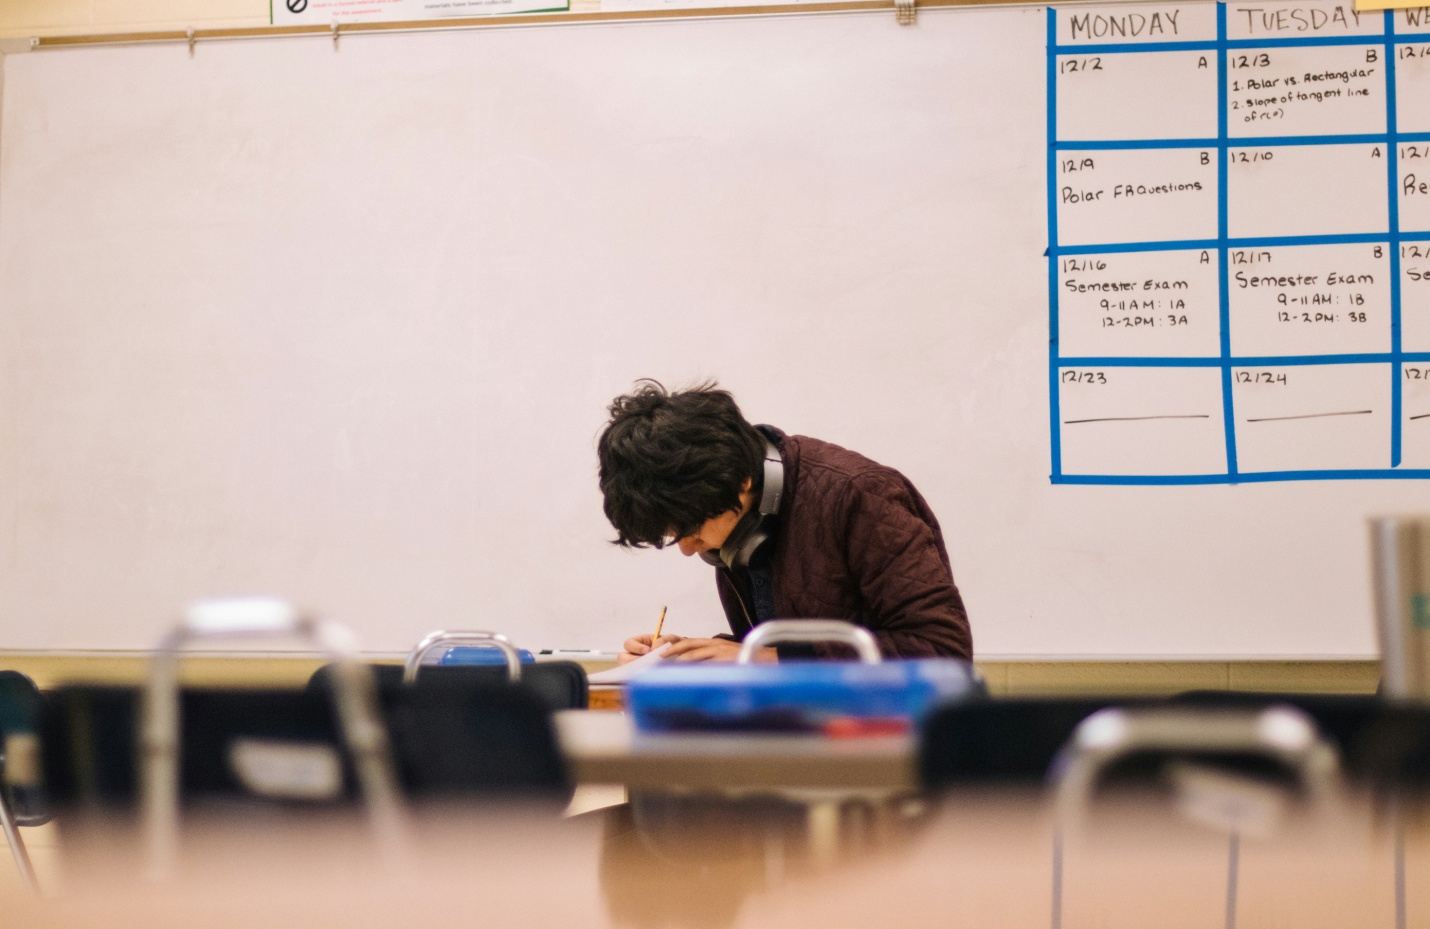 Student wearing a brown sweater working in a classroom.